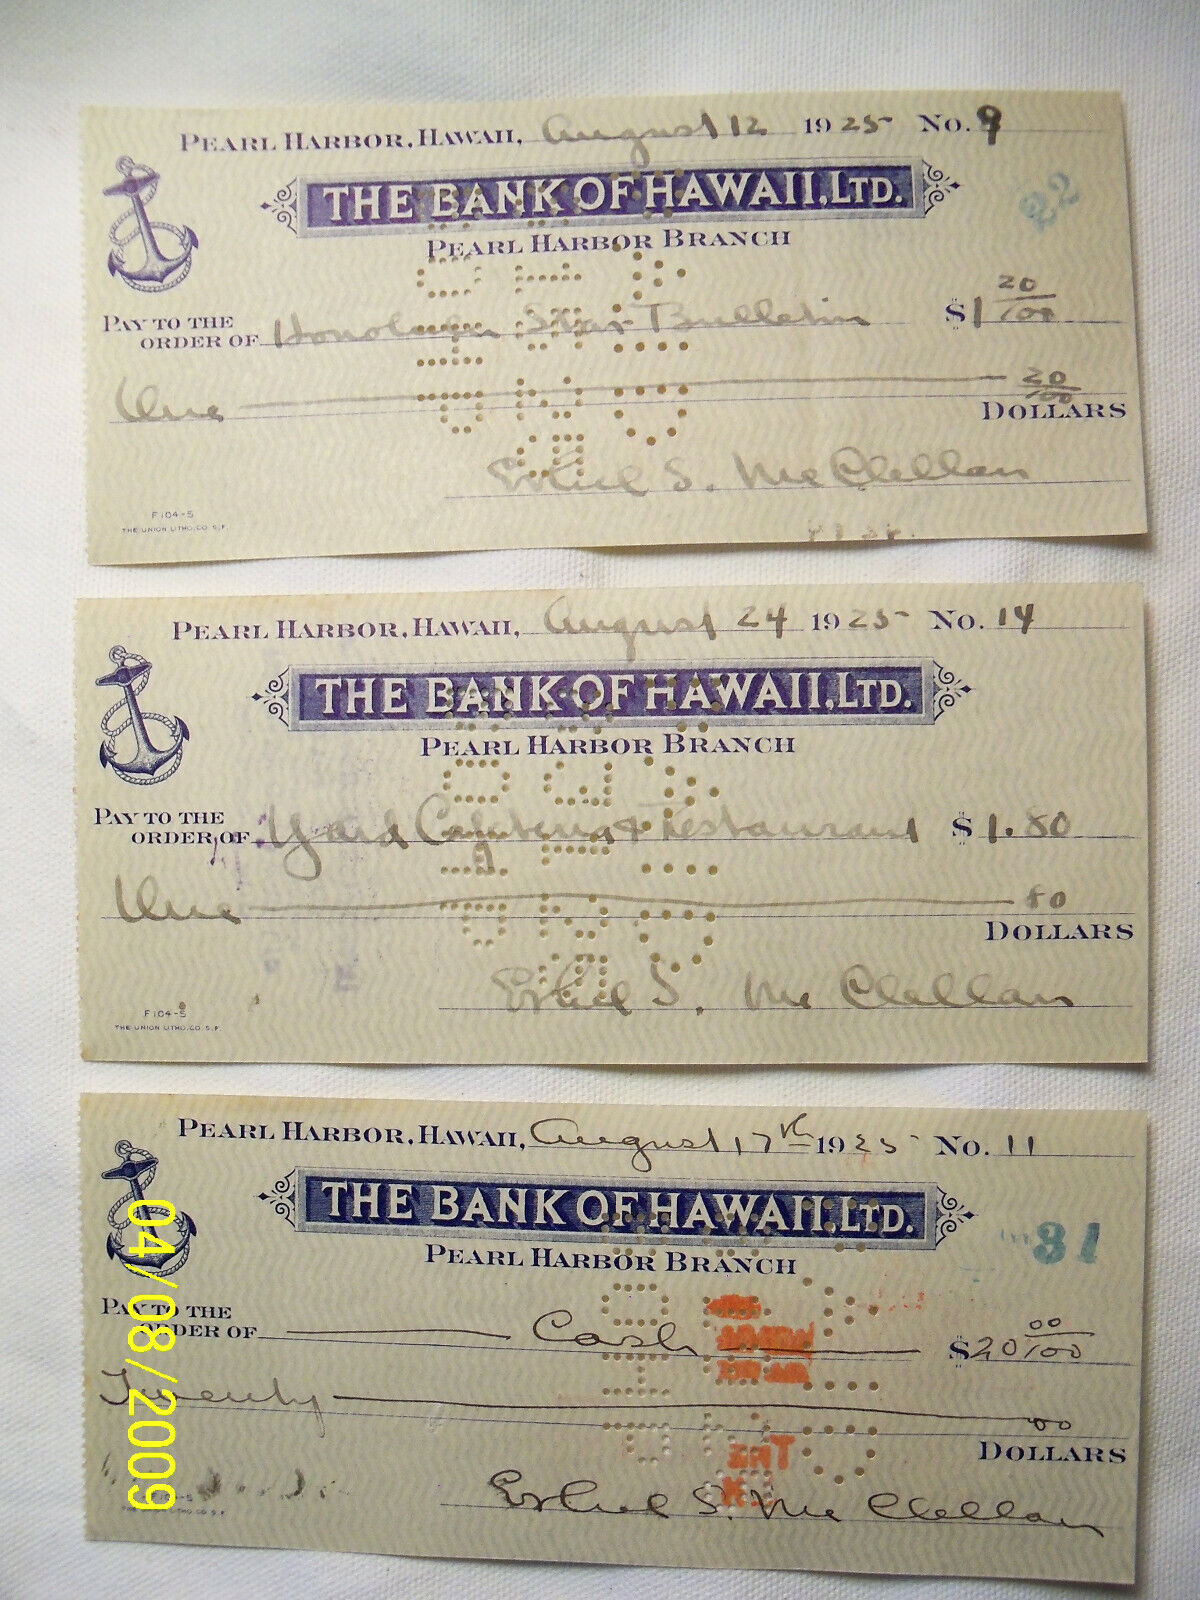 3 CHECKS THE BANK OF HAWAII PEARL HARBOR BRANCH FOR MILITARY OF U.S. NAVAL BASE 